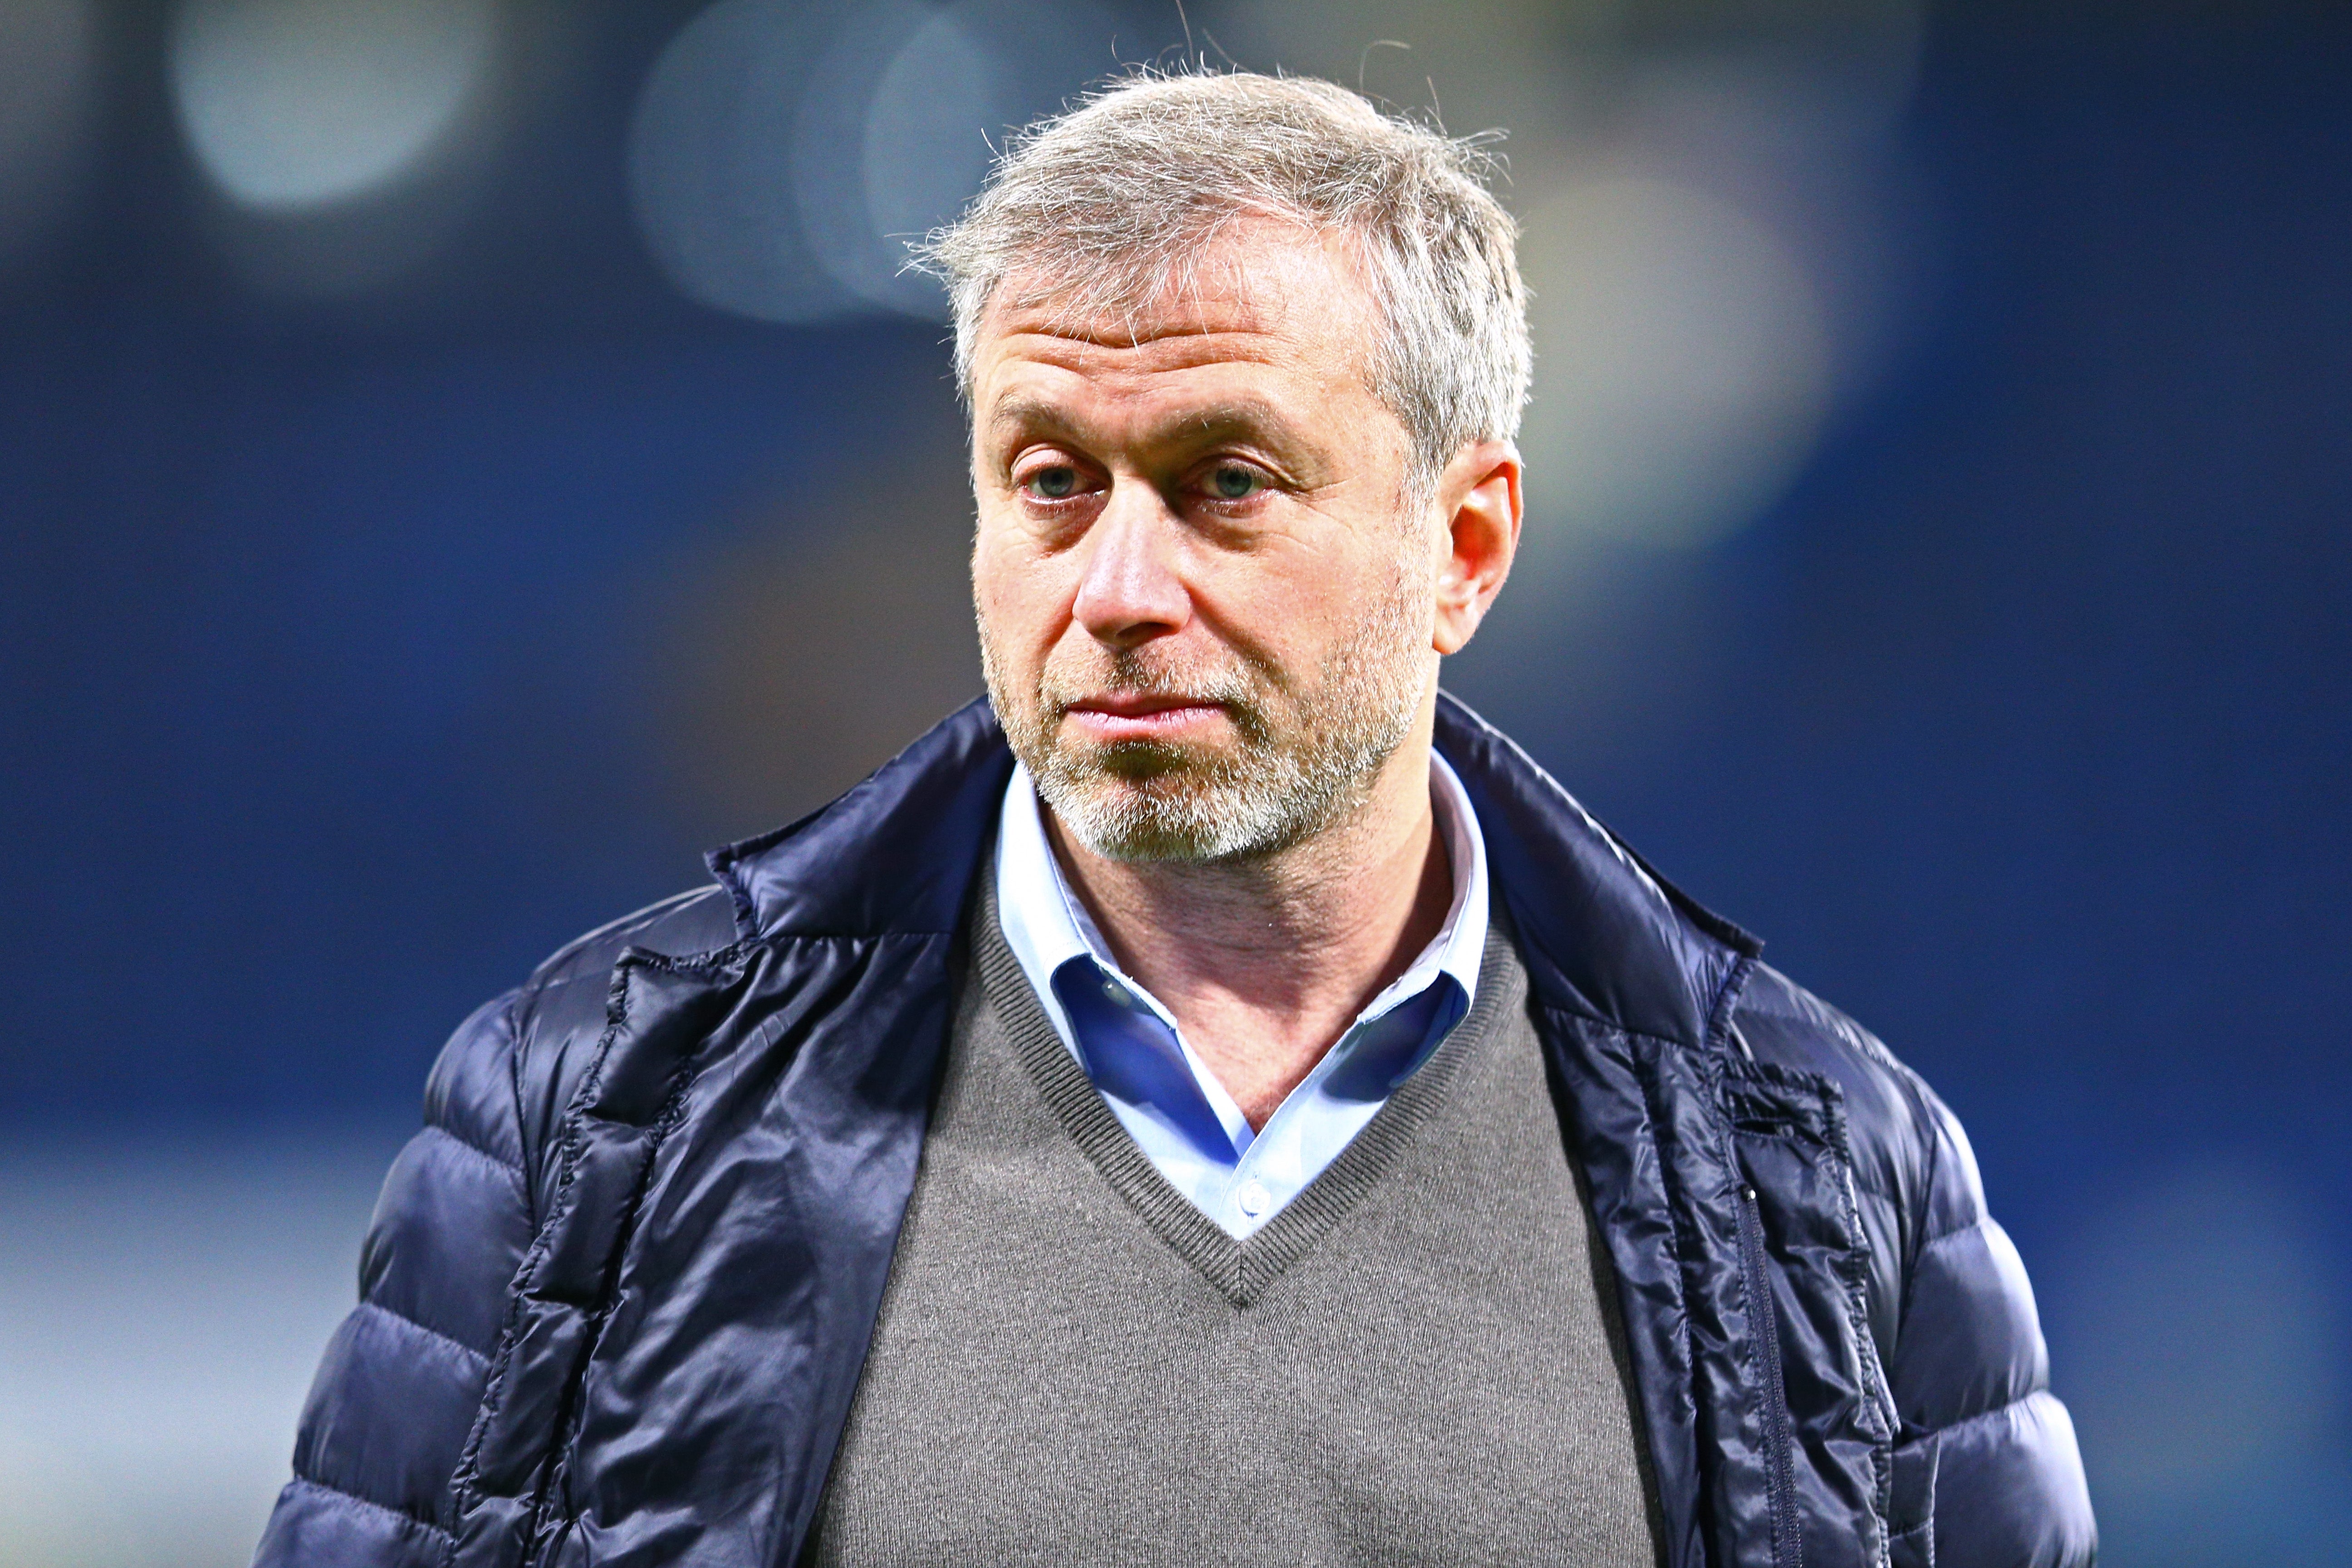 Roman Abramovich’s exit should spark the game into asking some tough questions